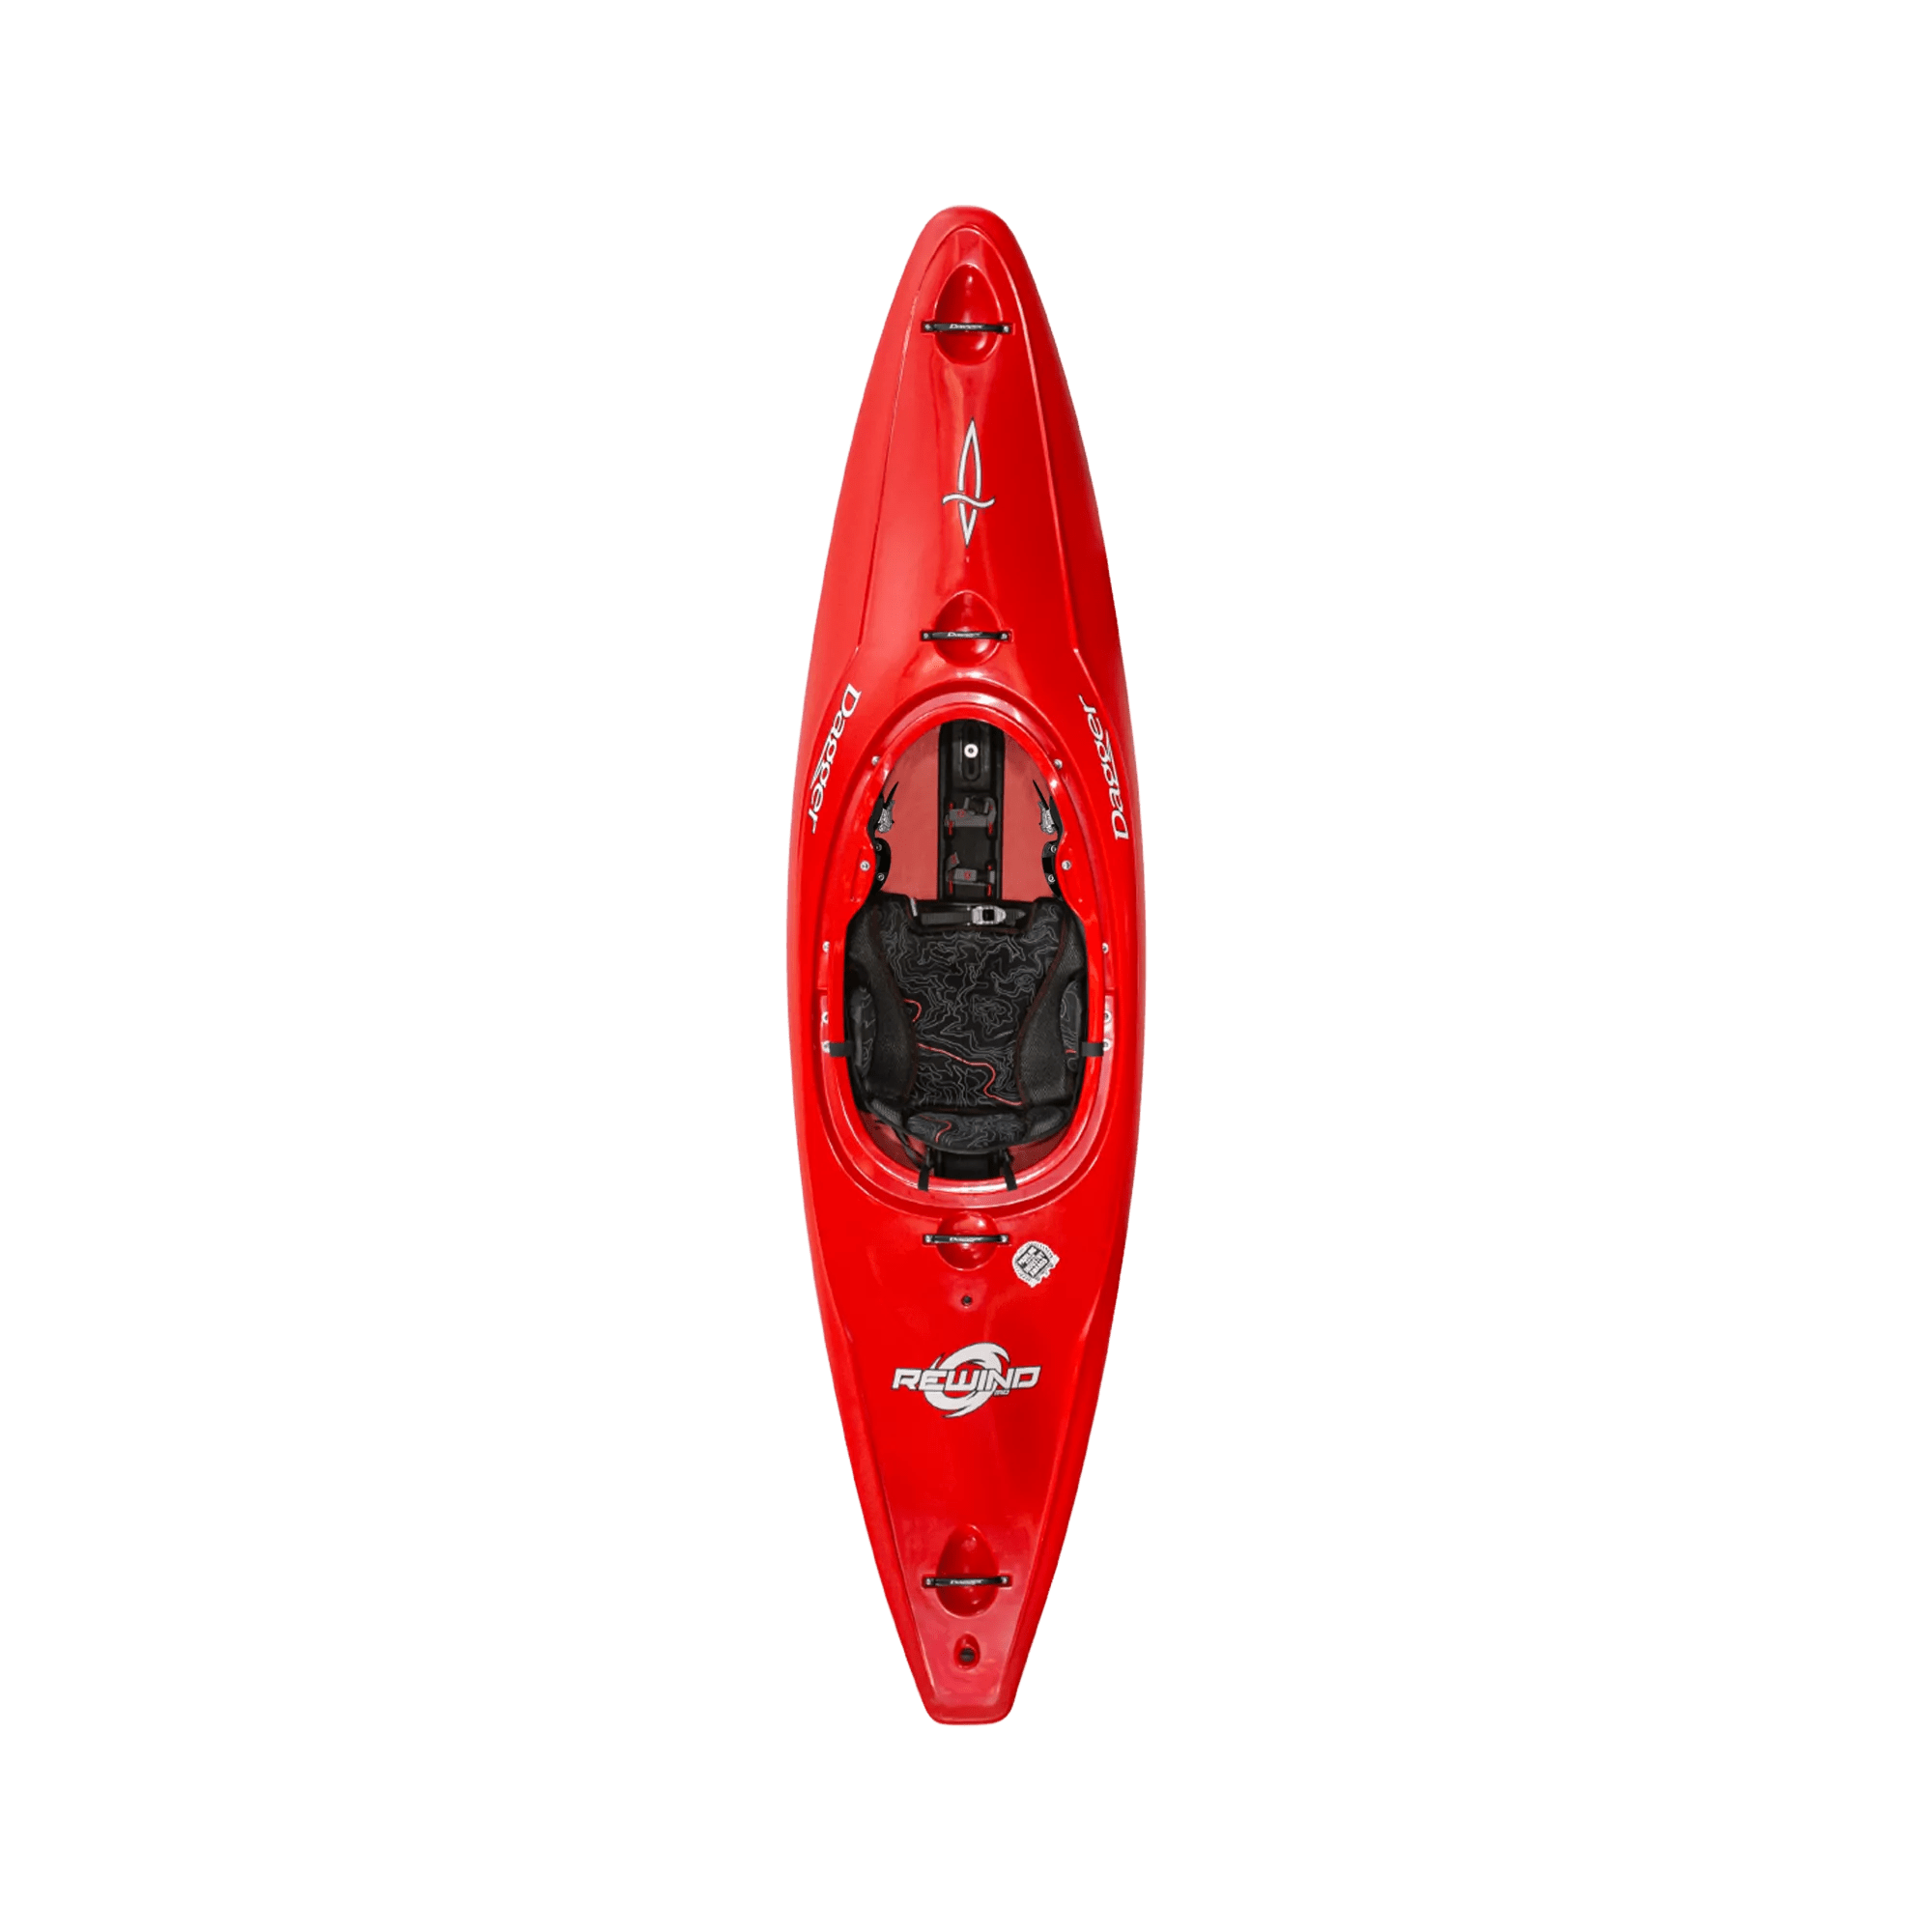 DAGGER - Rewind MD River Play Whitewater Kayak - Red - 9010344057 - TOP